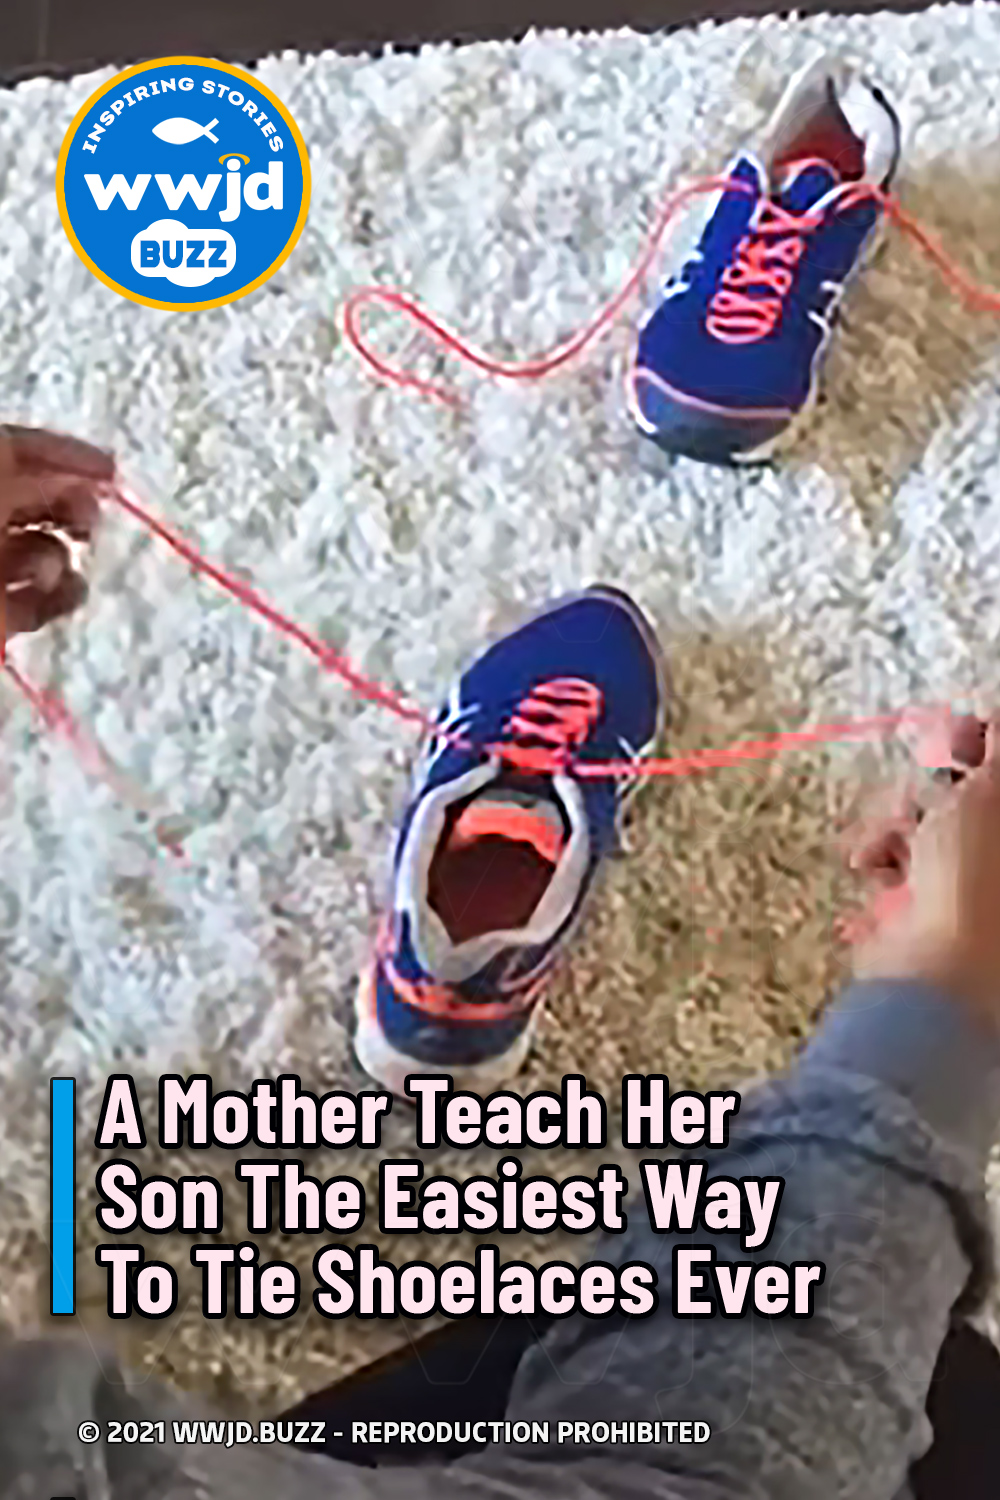 A Mother Teach Her Son The Easiest Way To Tie Shoelaces Ever